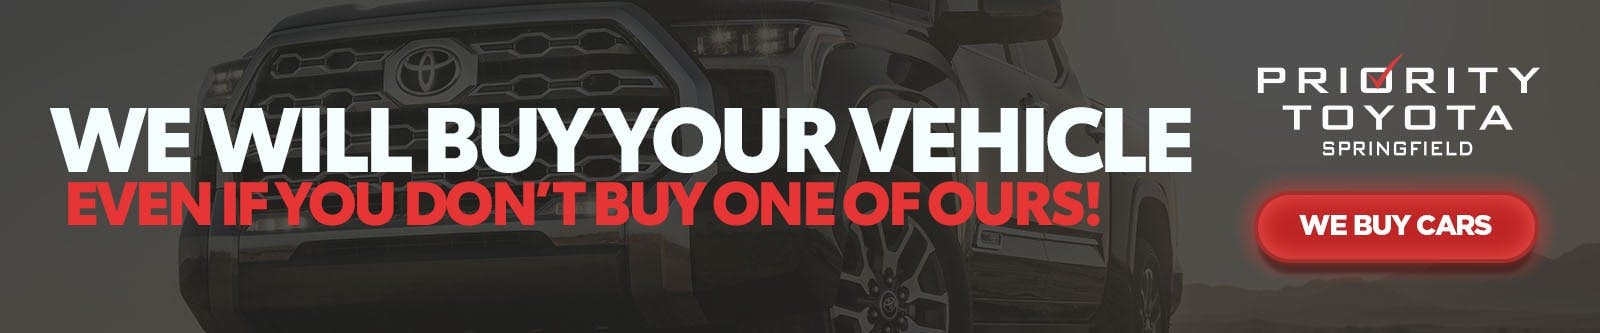 We will buy your vehicle!